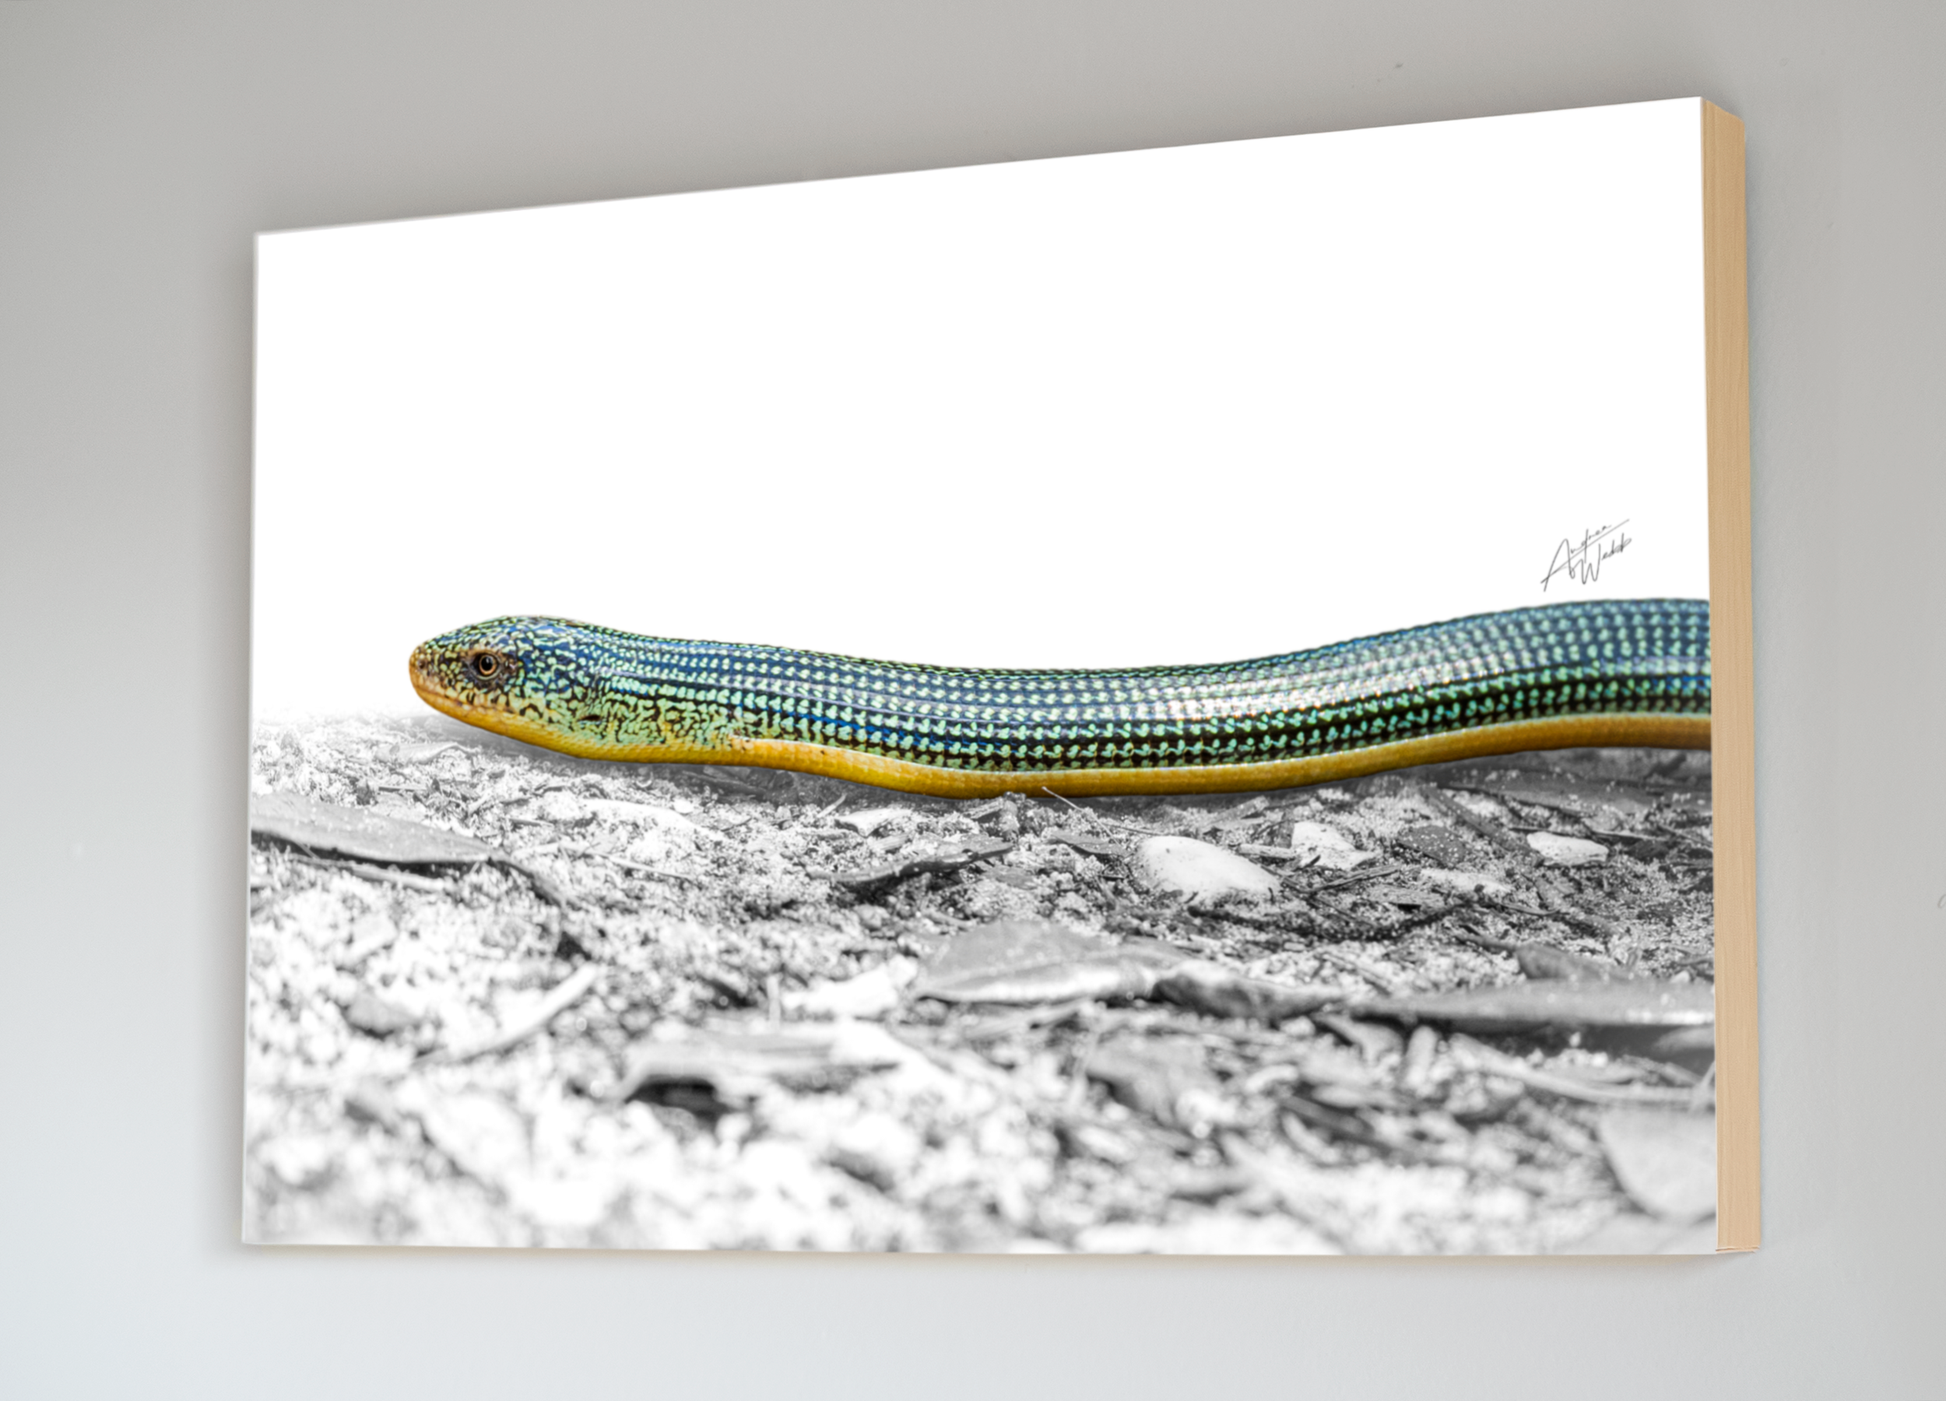 The Eastern Glass Lizard is commonly found in the eastern half of the United States. They are generally a green or brown color, with a glassy appearance. Glass lizard portrait. Glass lizard art. Glass lizard artwork. Glass lizard photography. Animal Photography. Glass lizard wall art. Glass lizard gifts.